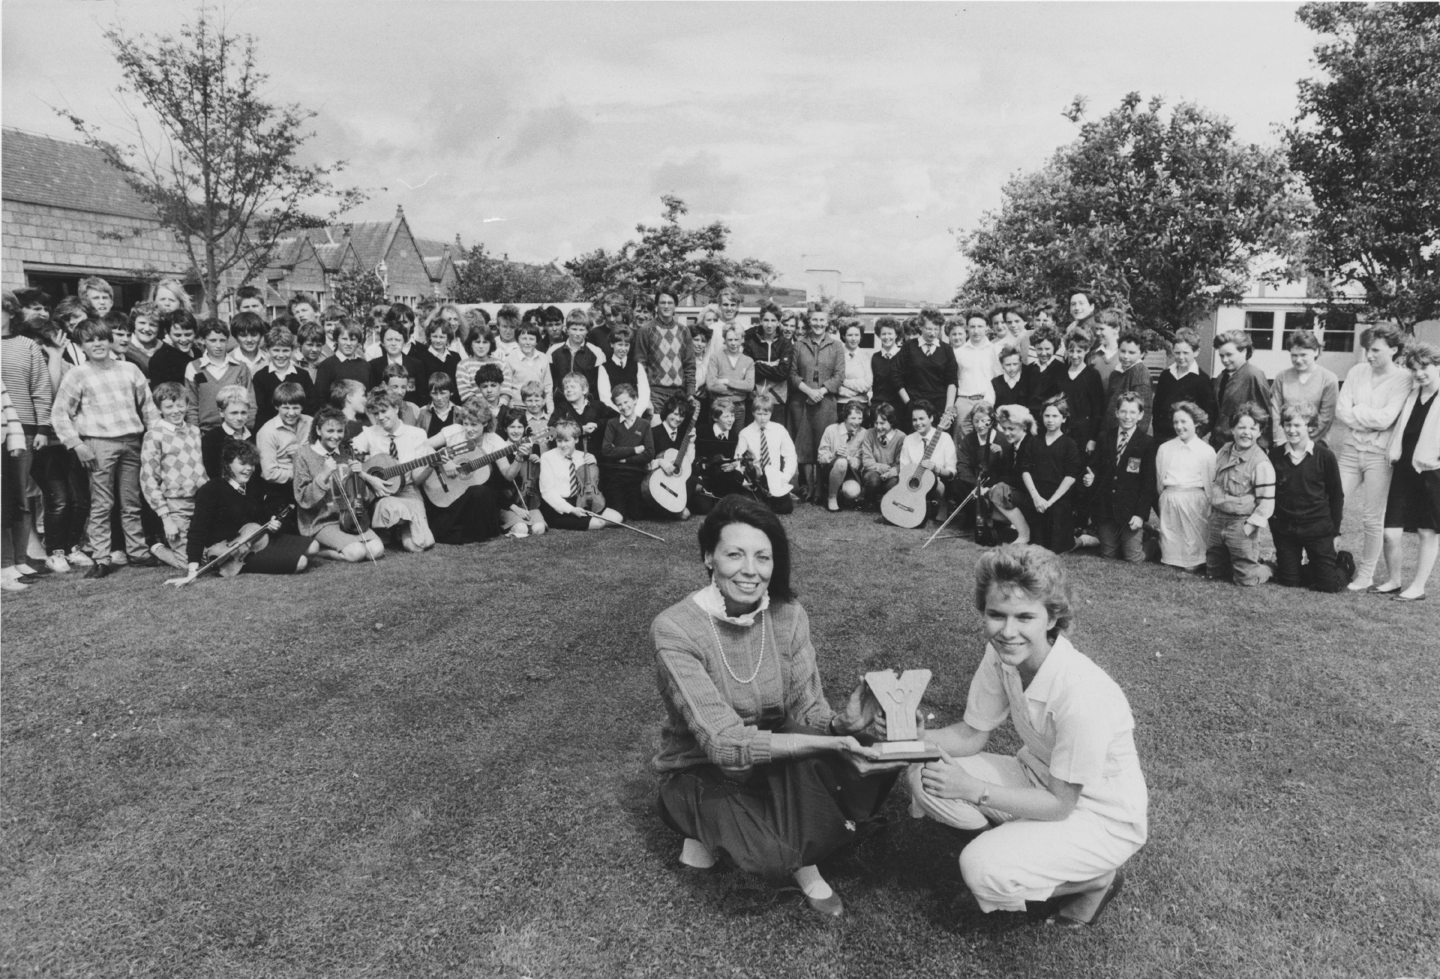 Two students with a trophy sitting on the grass, surrounded by a large group of pupils